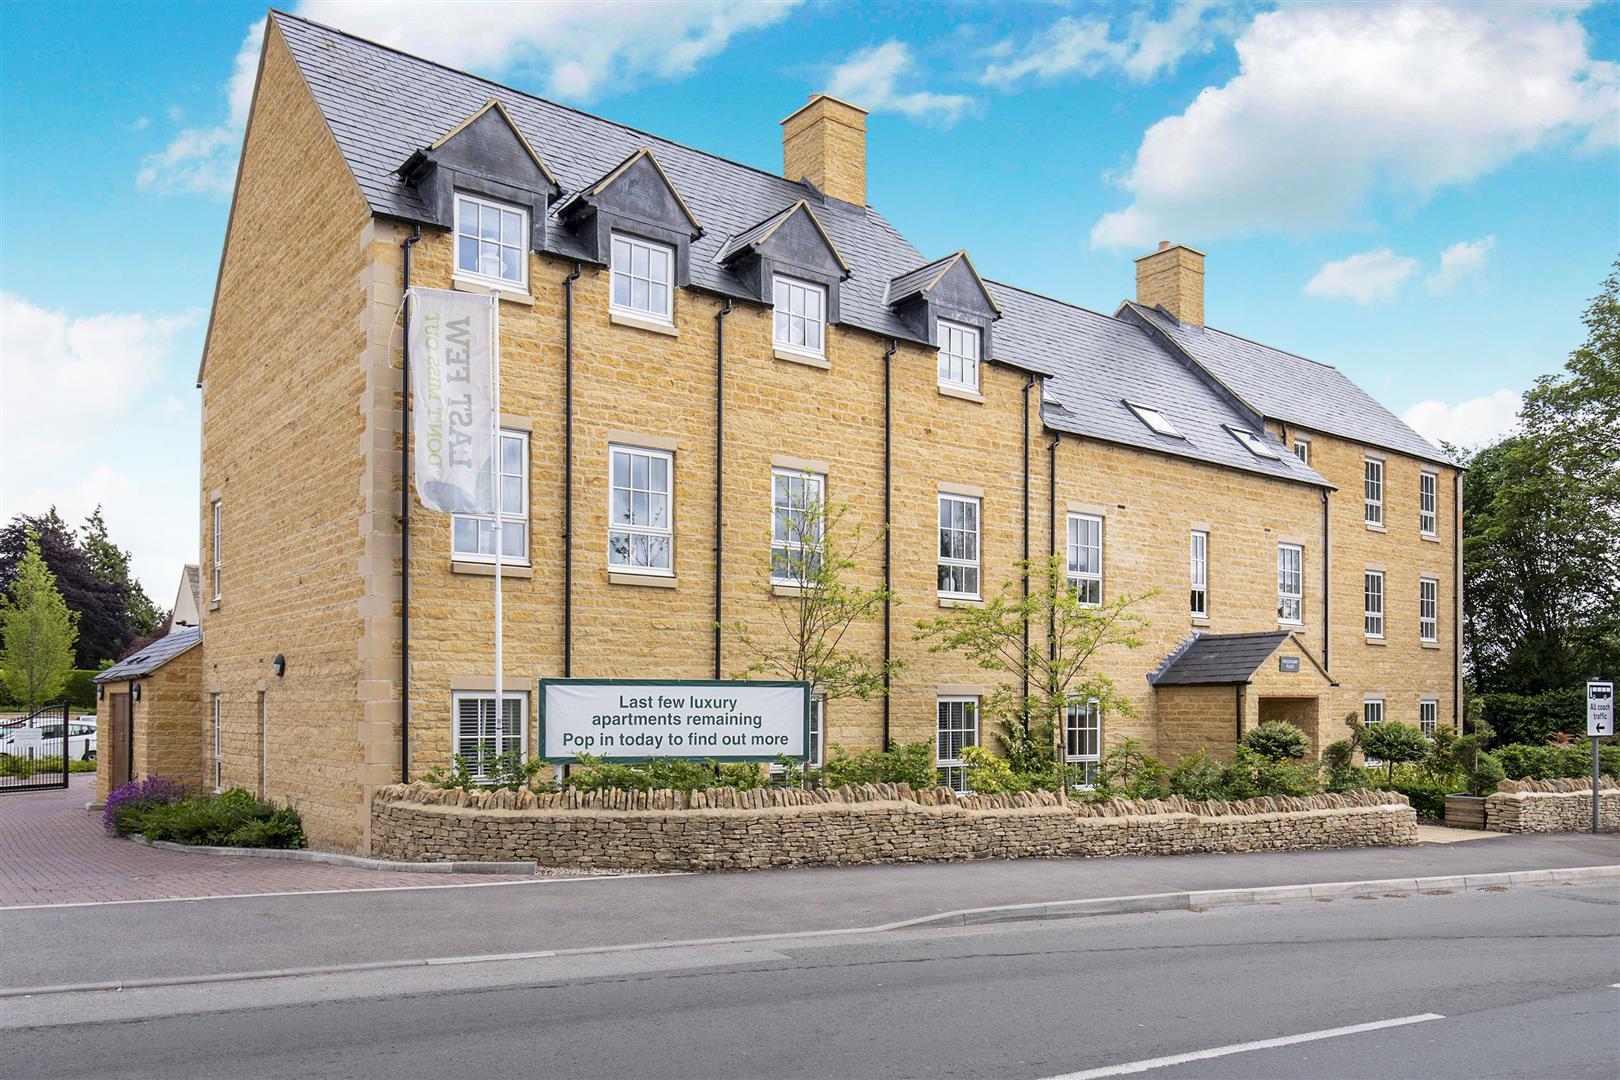 Willoughby Place, Station Road, Bourton-on-the-Water, Cheltenham, Gloucestershire, GL54 2FF